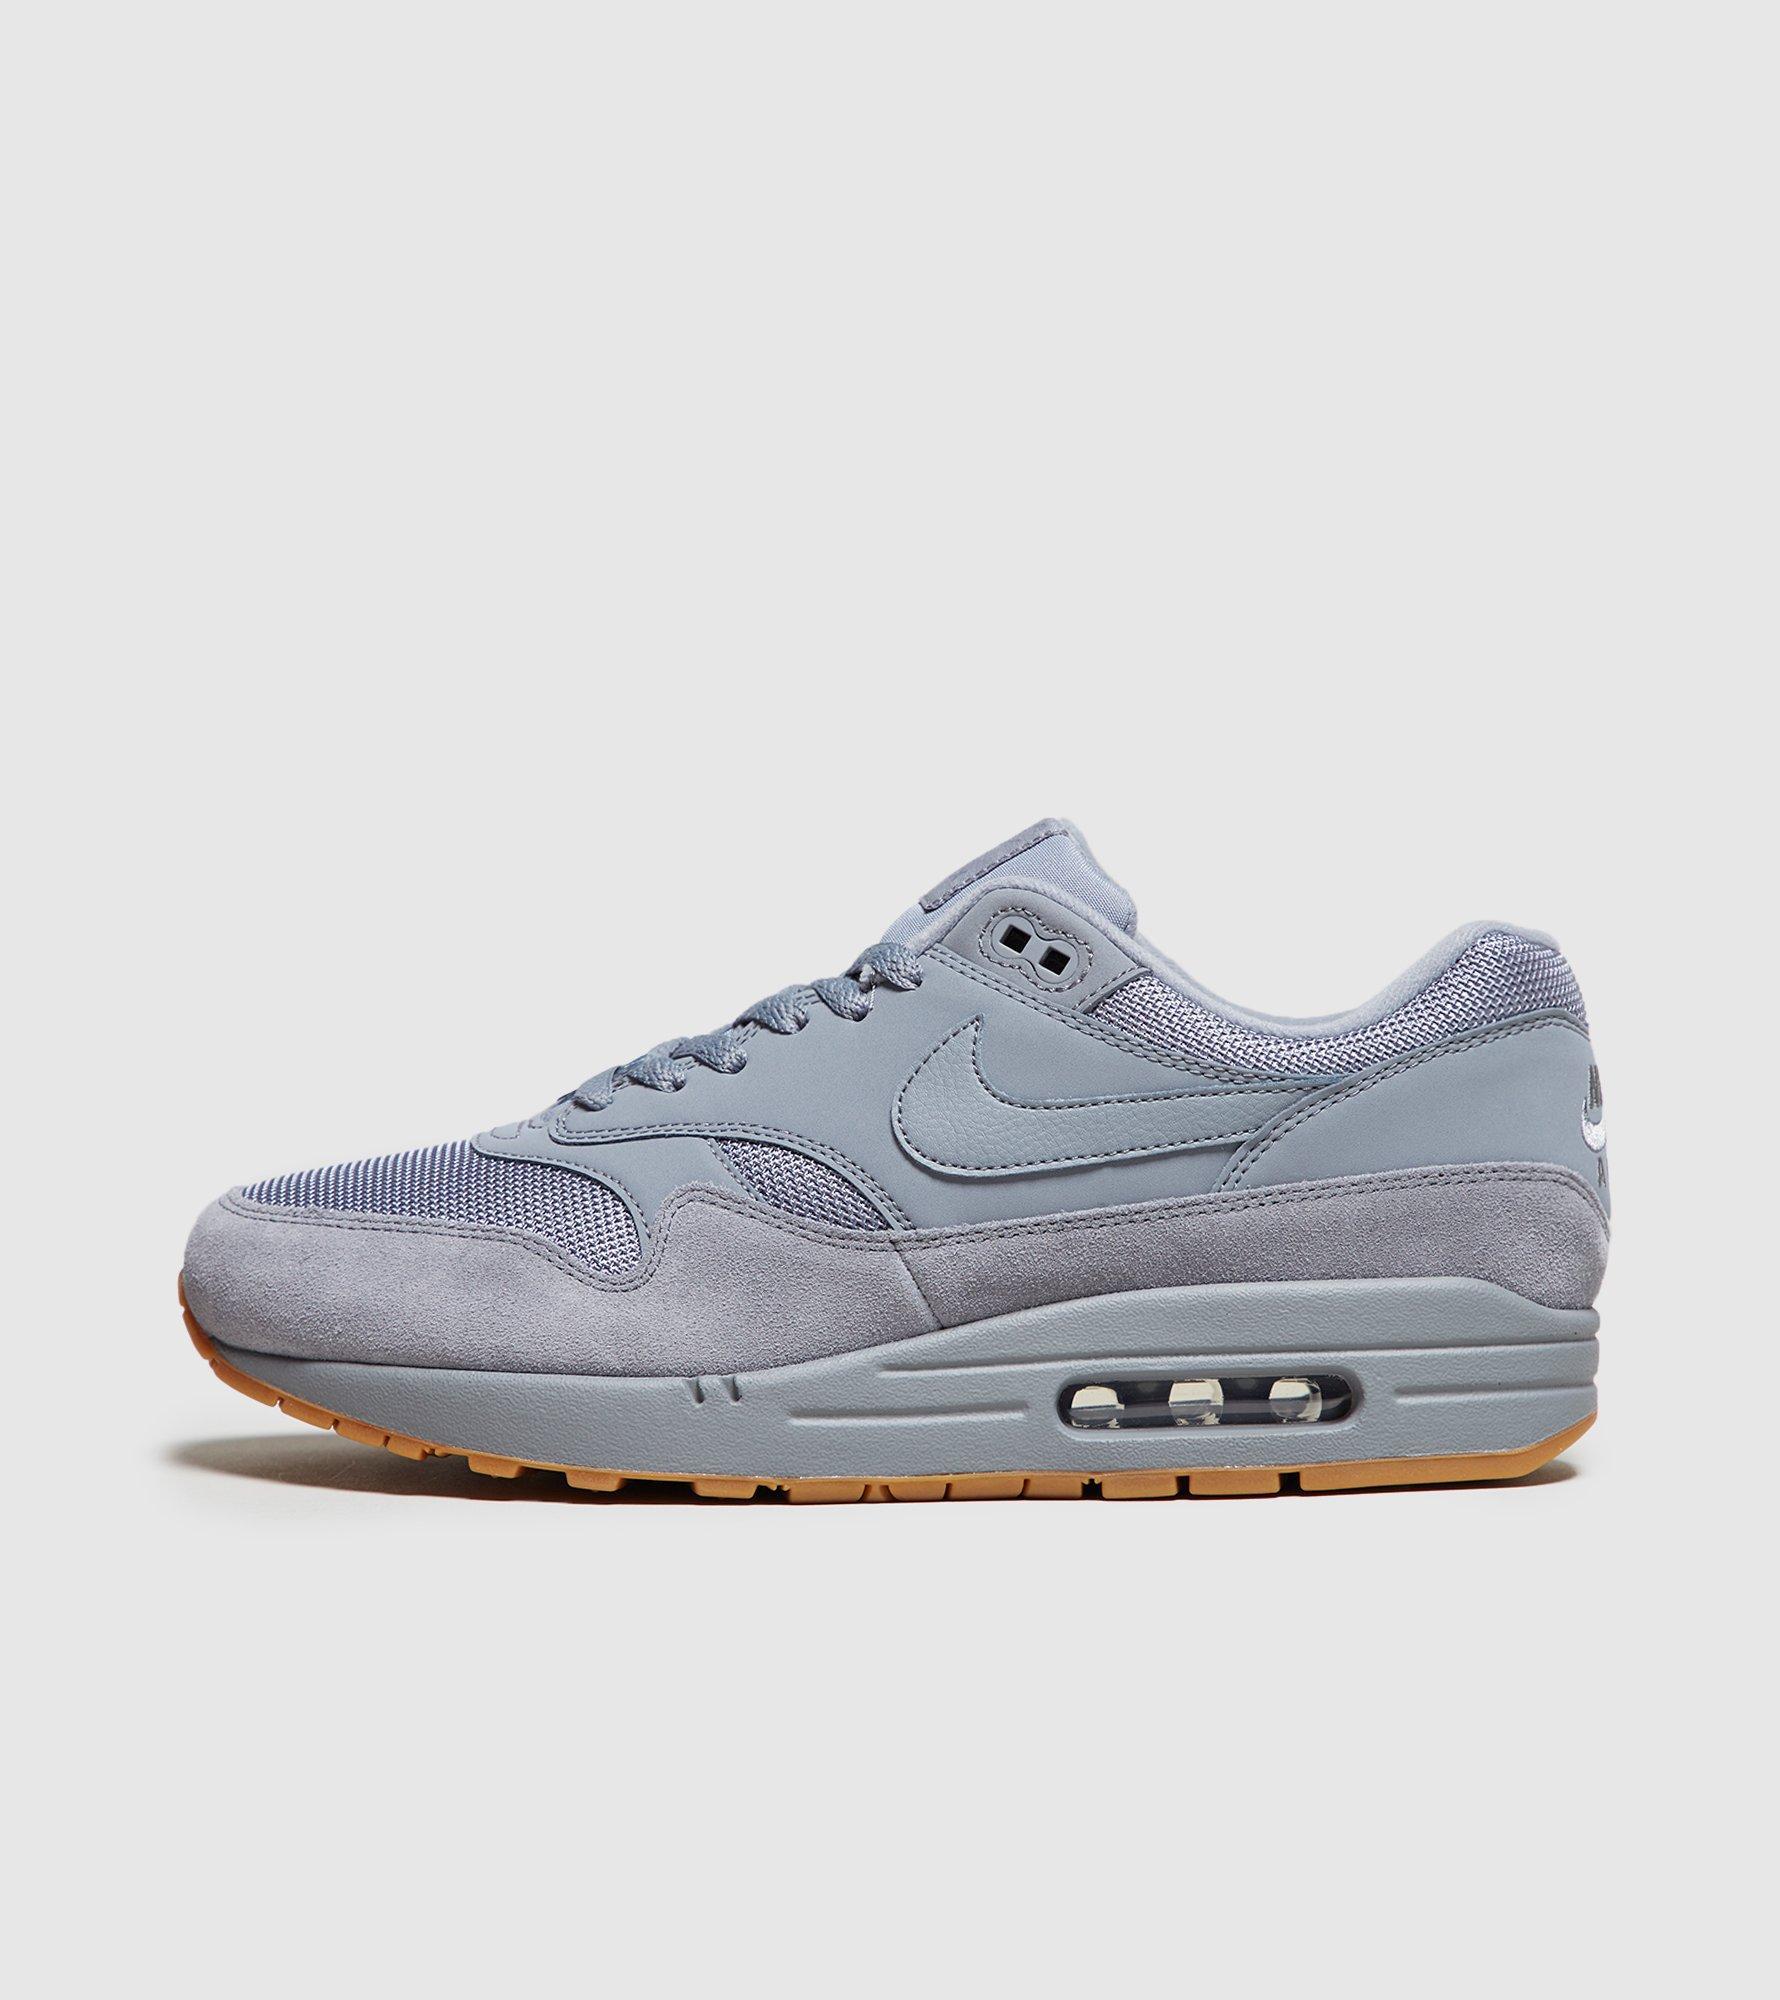 Nike Suede Air Max 1 Cool Grey/ Cool Grey in Gray for Men - Lyst